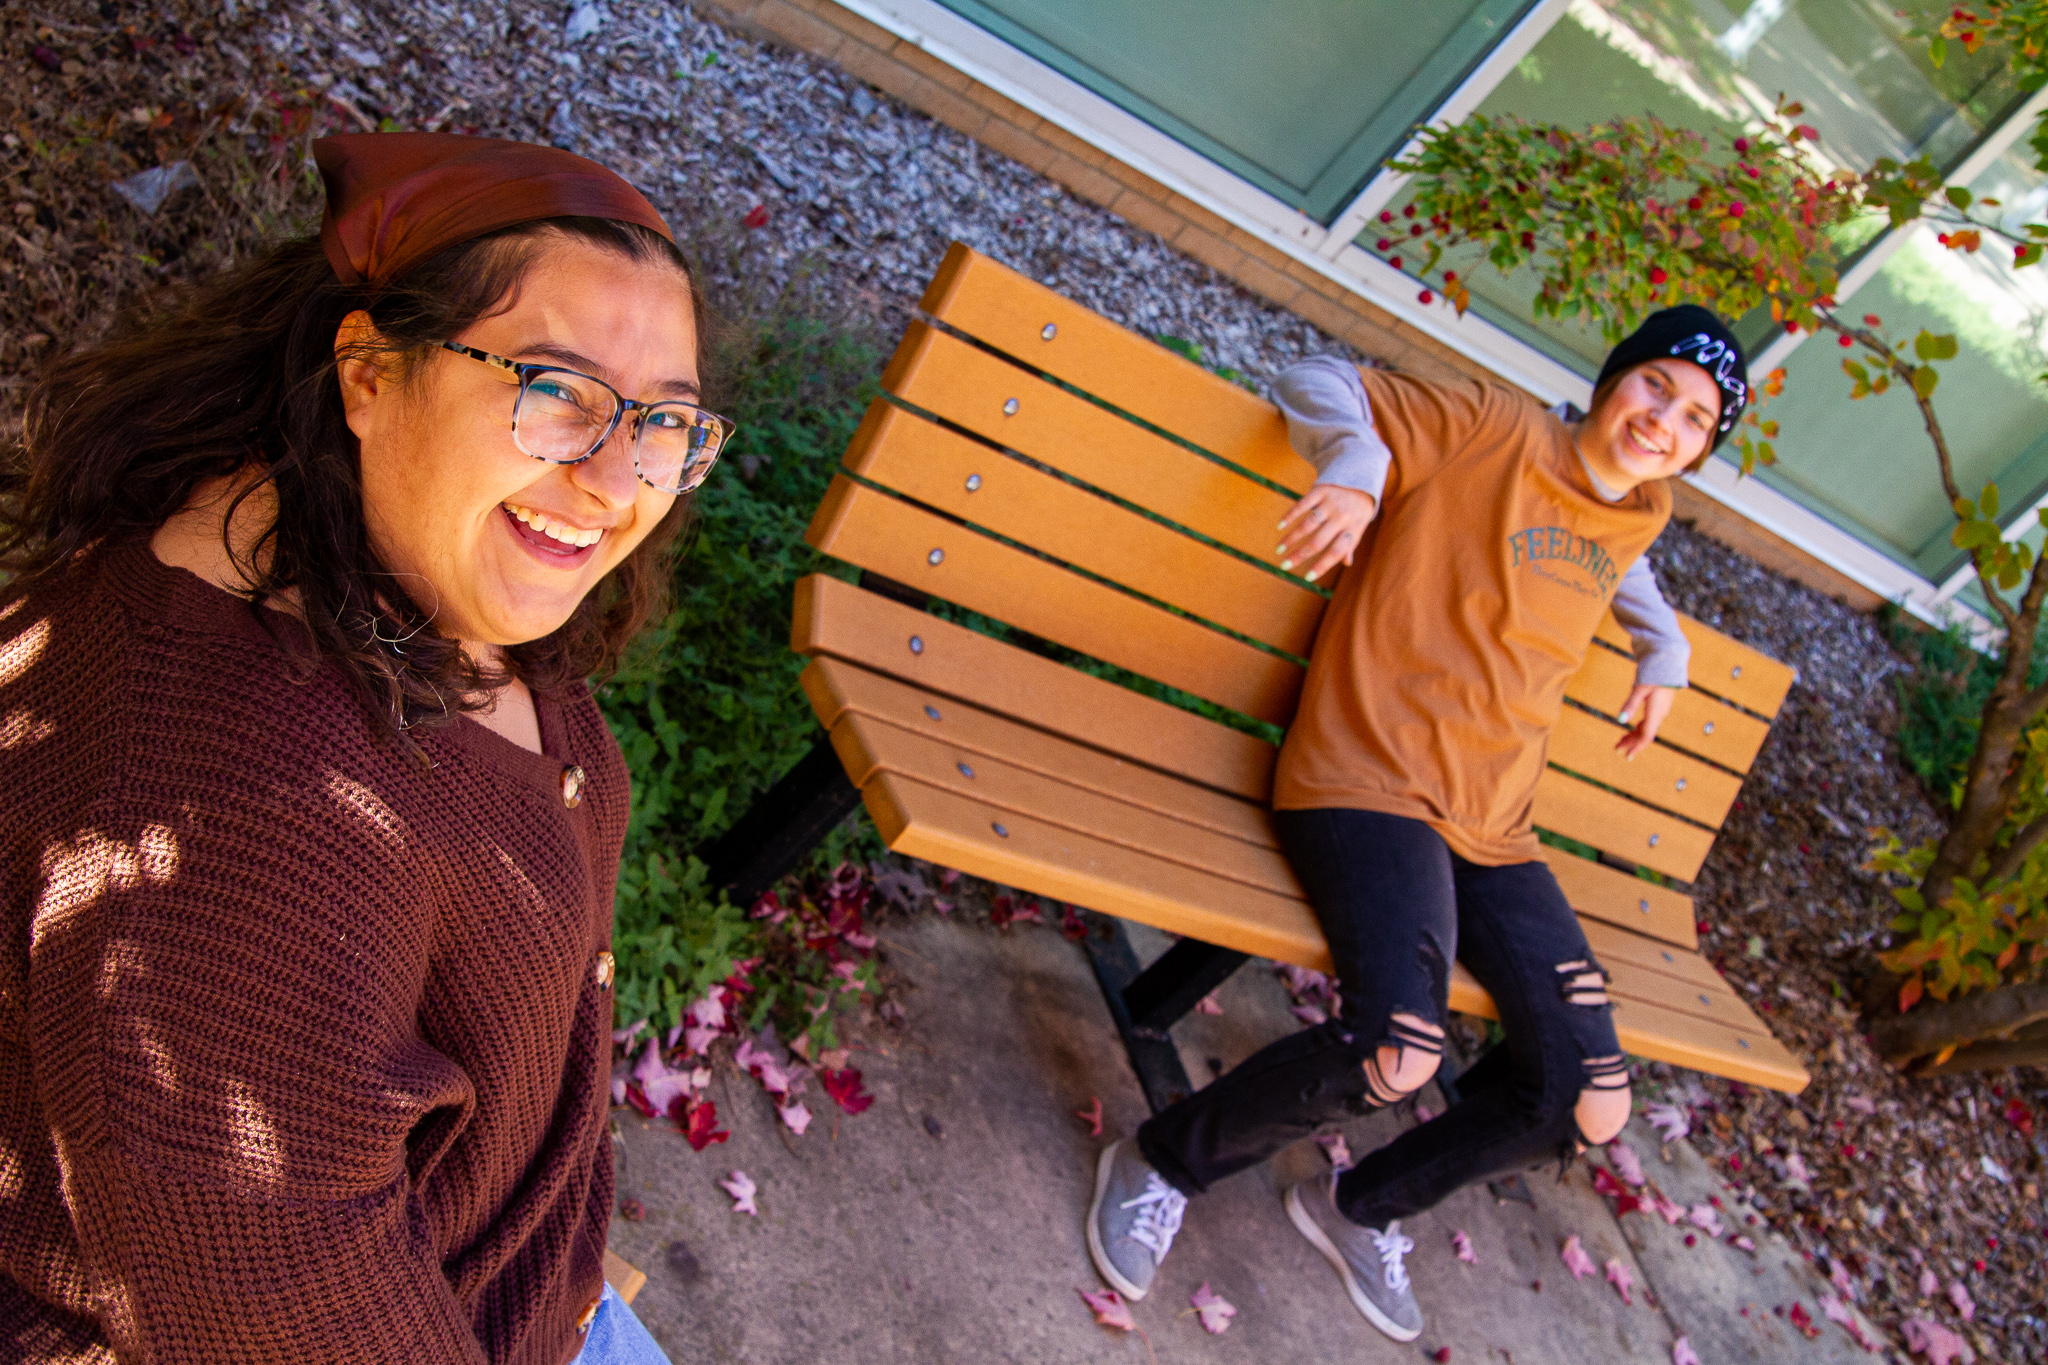 two young adults sit on seperate benches and glance up at the camera smiling for the photo